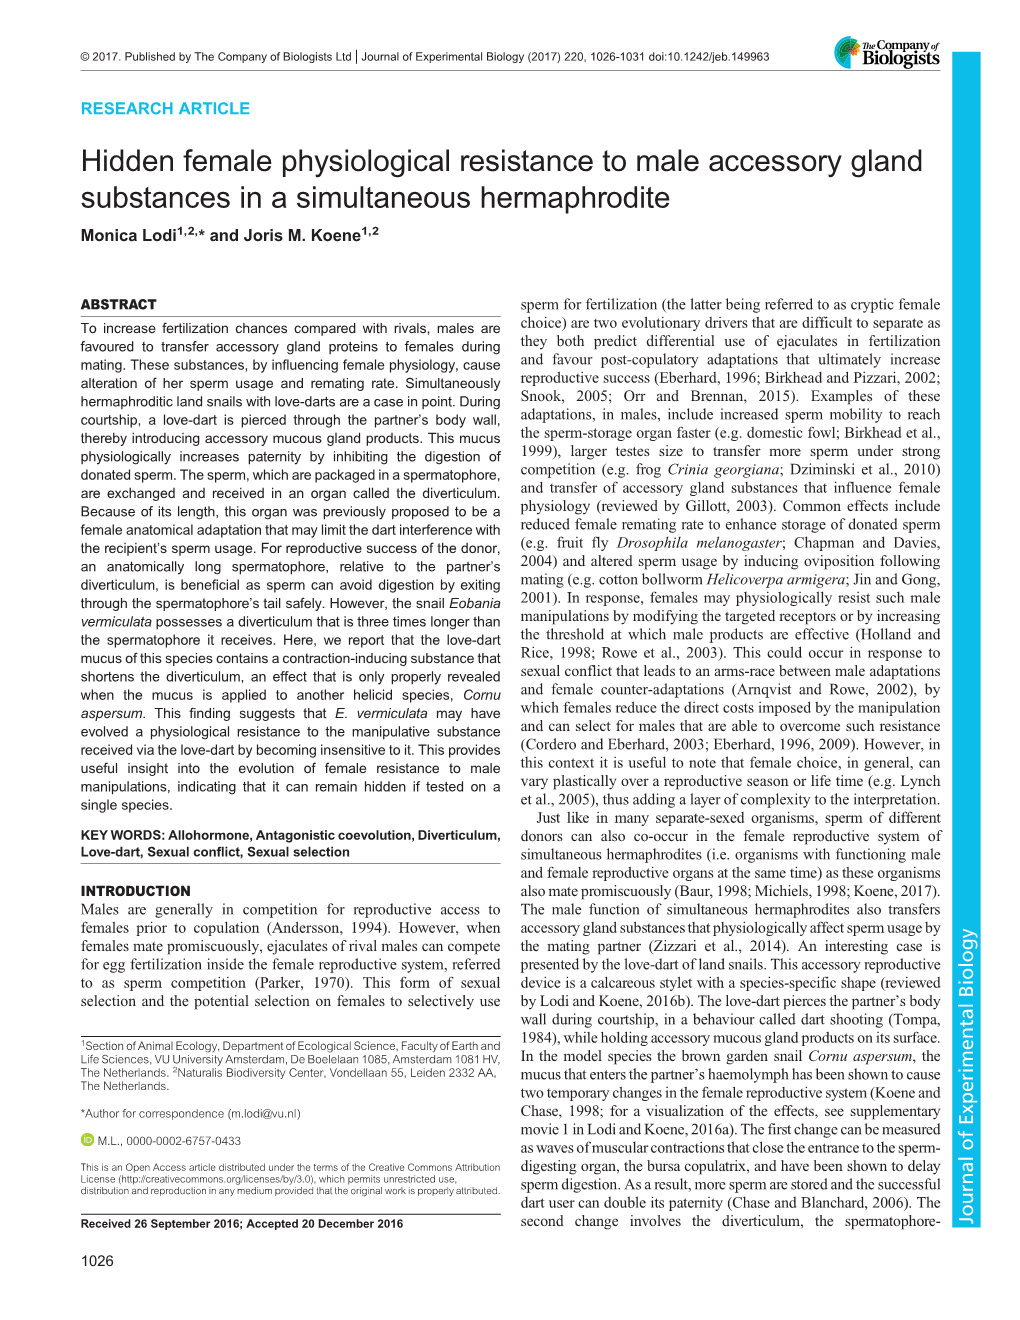 Hidden Female Physiological Resistance to Male Accessory Gland Substances in a Simultaneous Hermaphrodite Monica Lodi1,2,* and Joris M